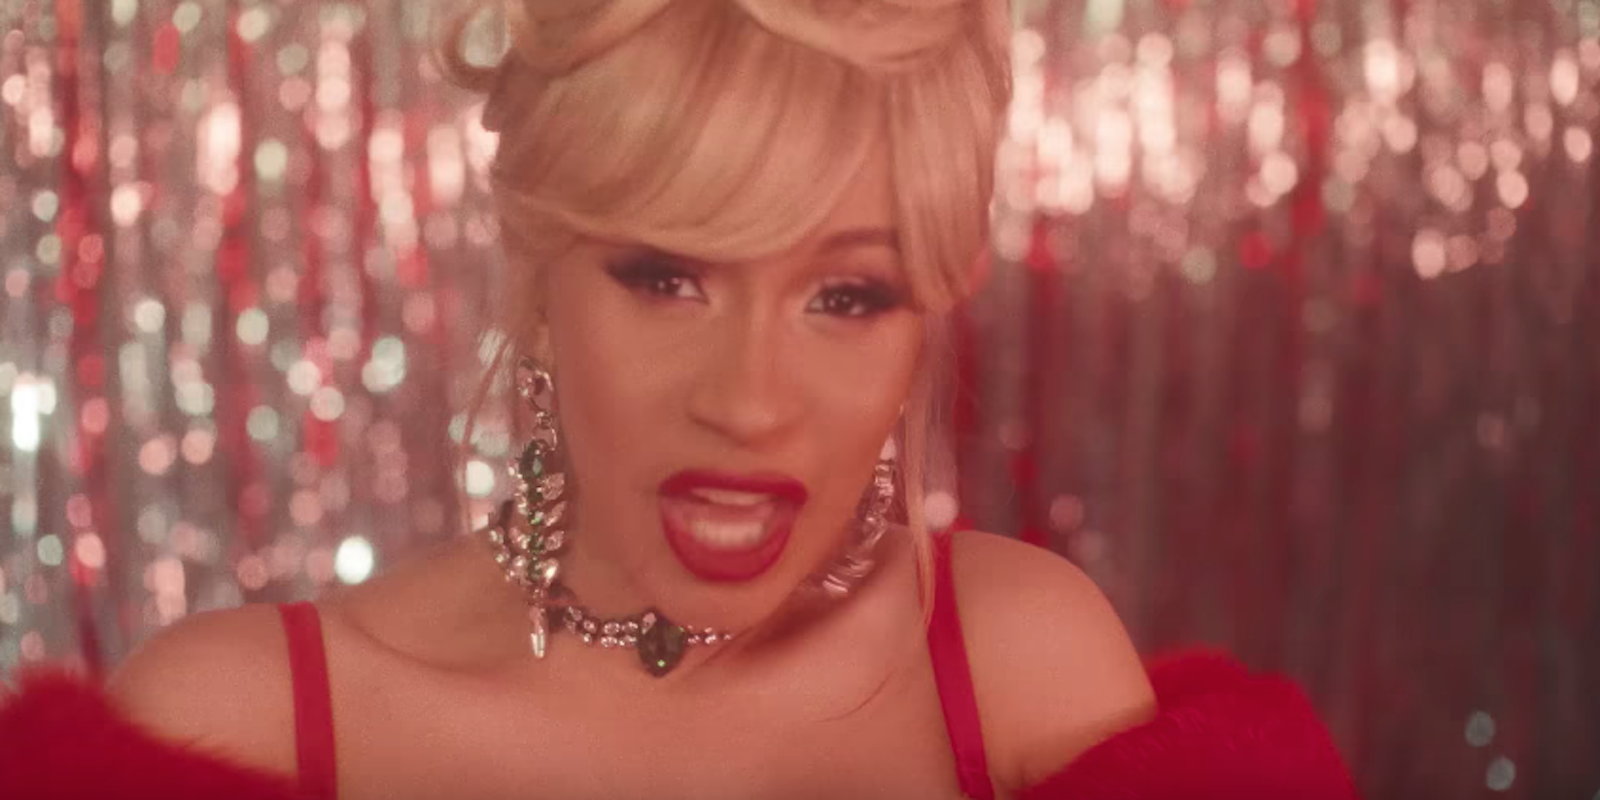 Cardi B in a red gown and diamond earrings